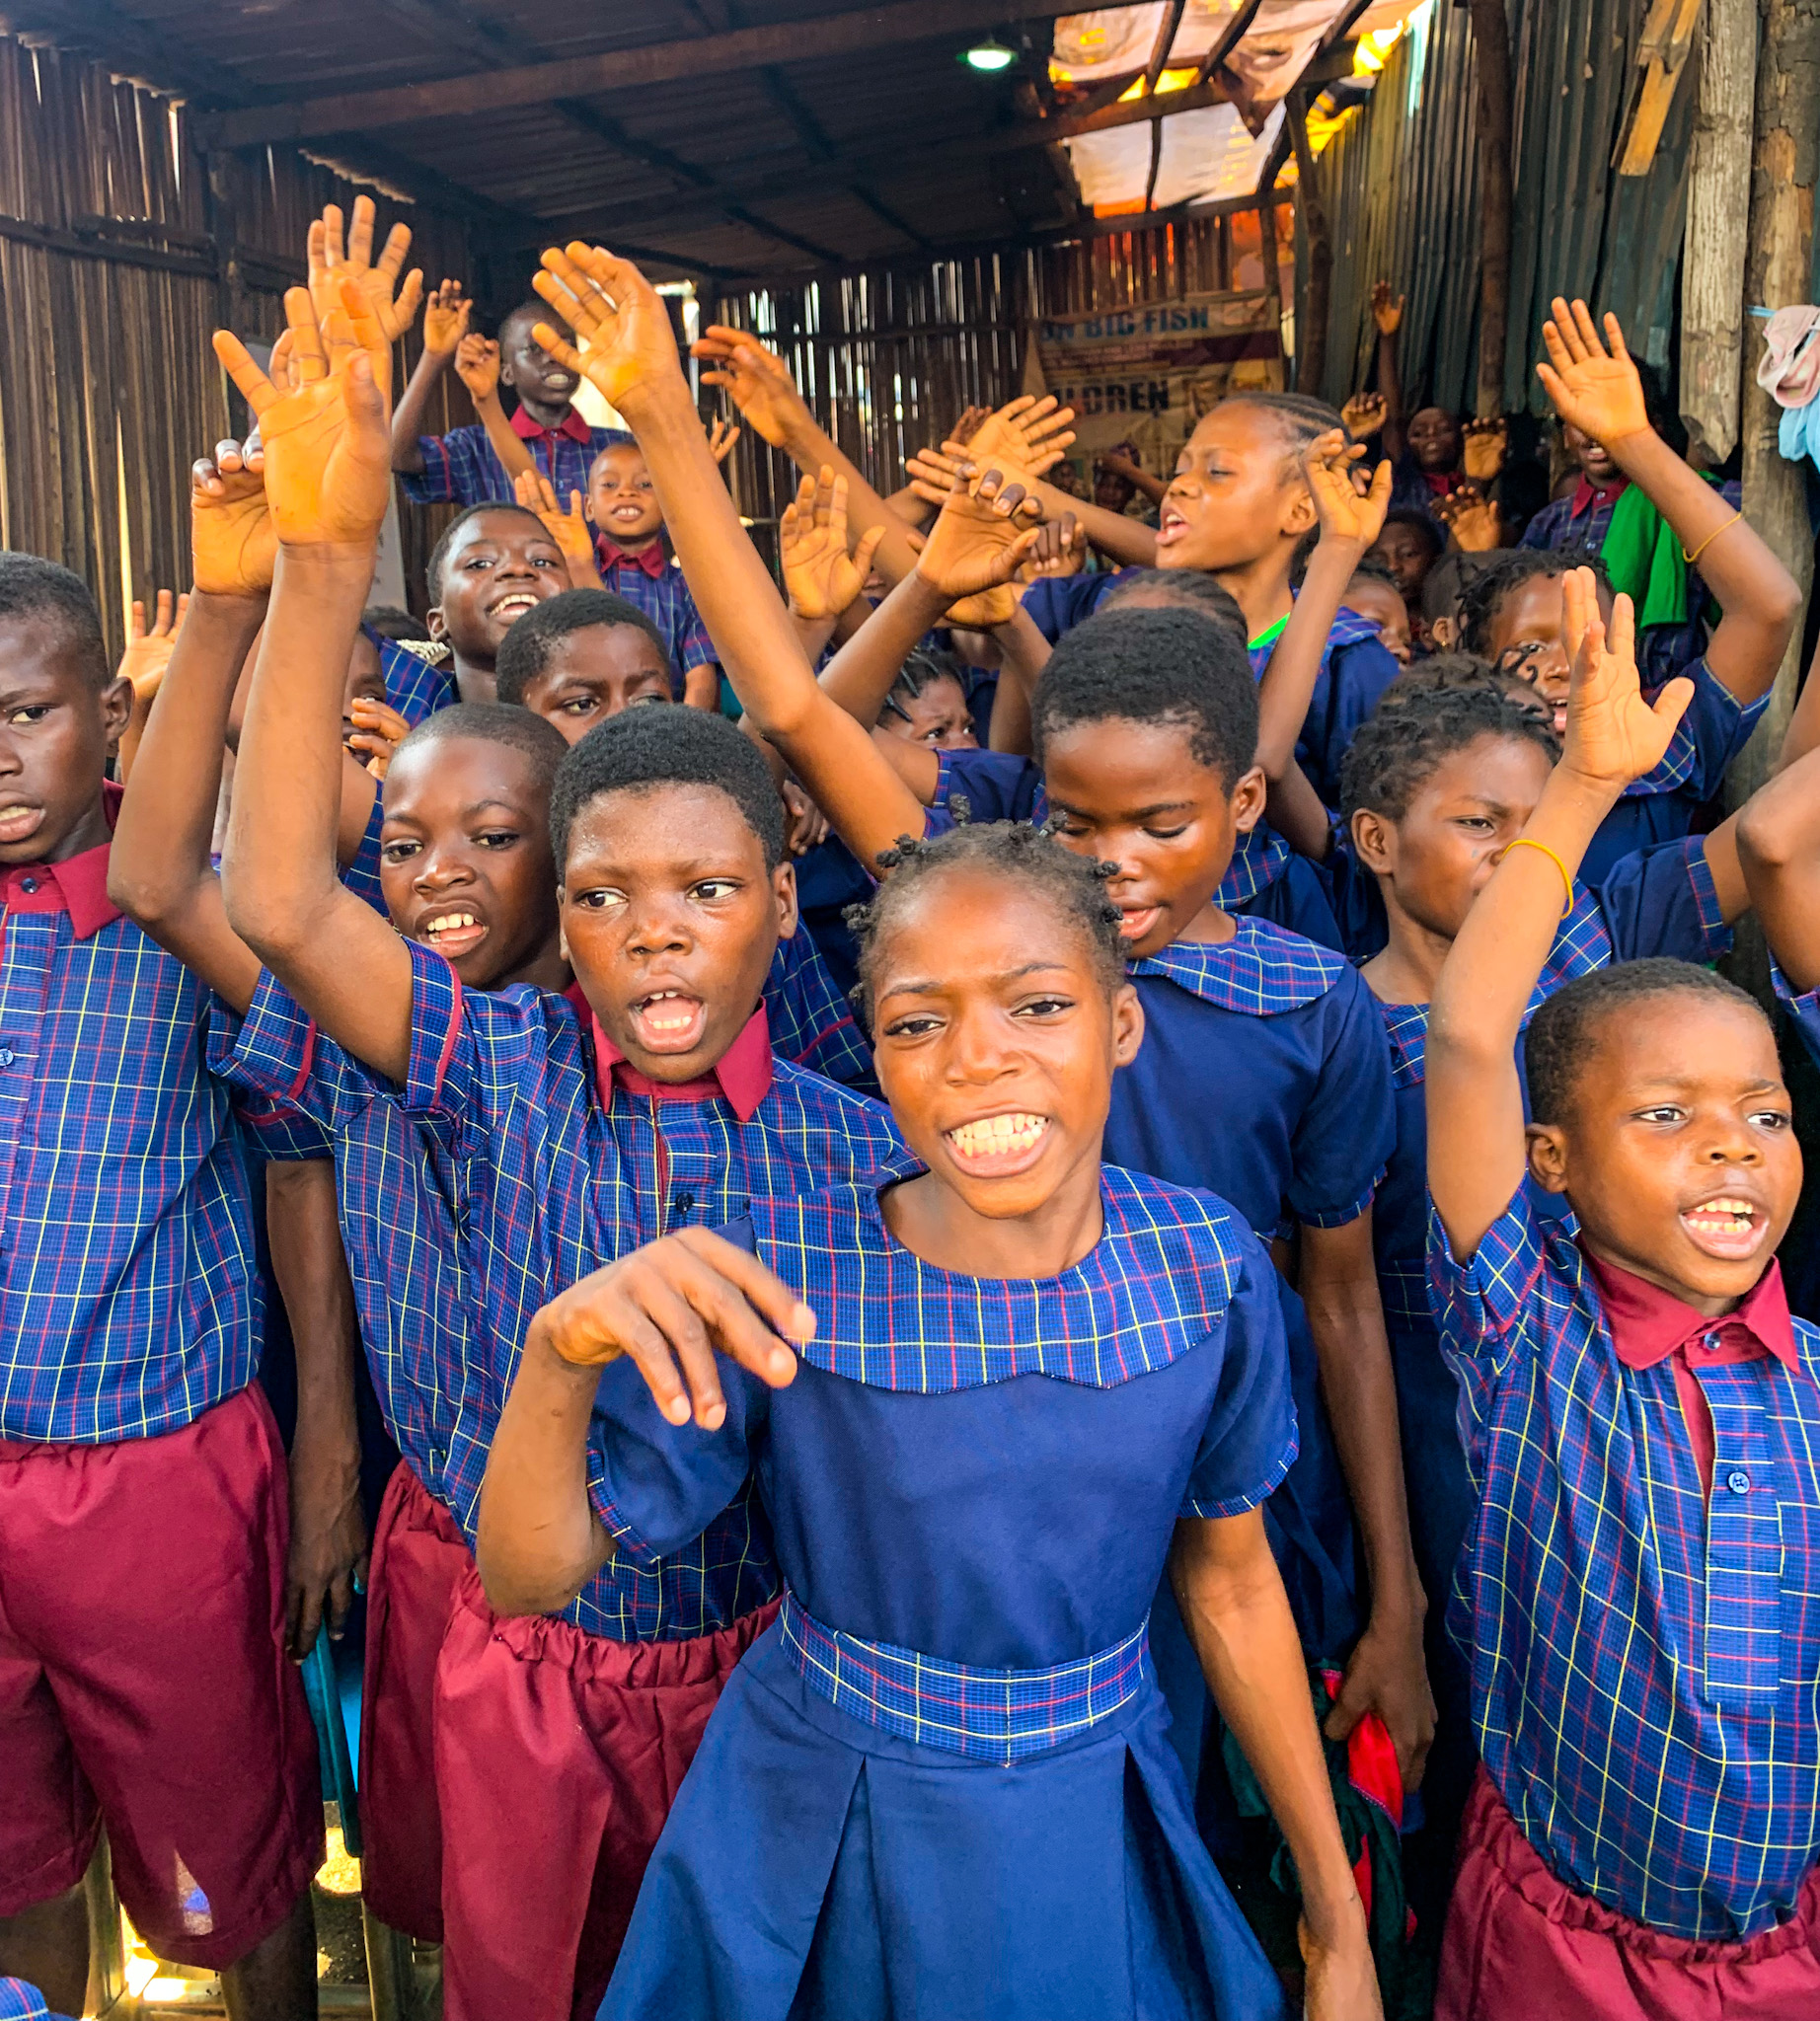 Ava and George and Trinitas Foundation Collaborate to Empower 400 Underprivileged School Children with Uniforms